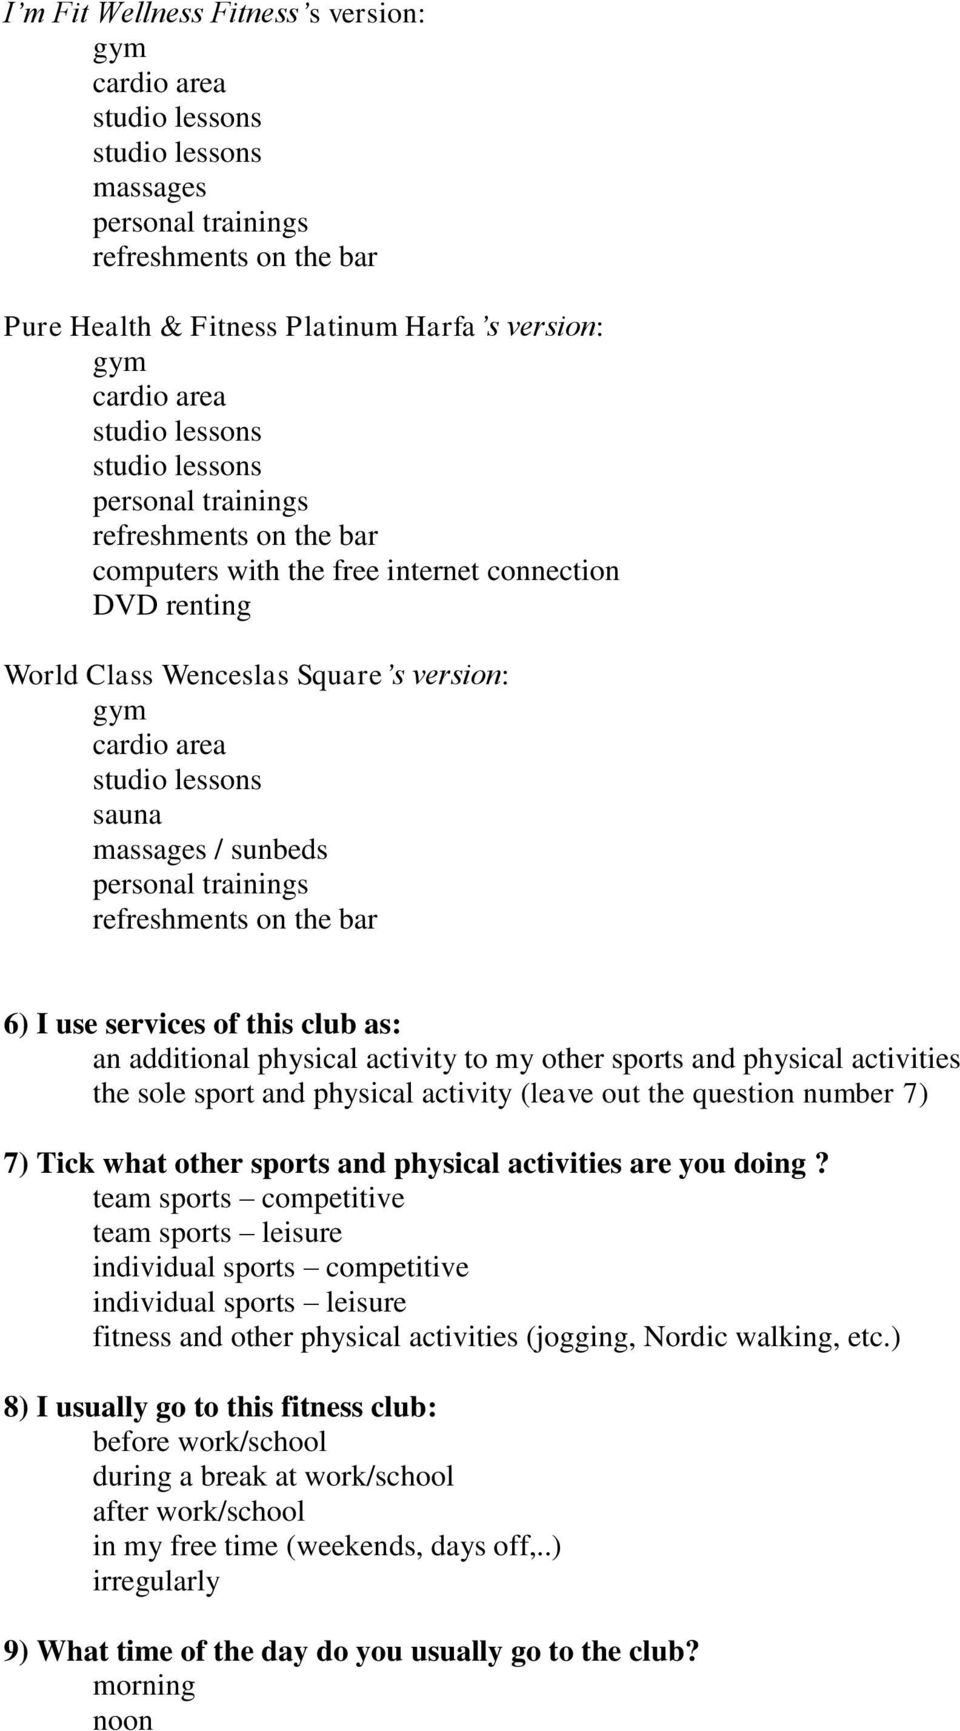 as: an additional physical activity to my other sports and physical activities the sole sport and physical activity (leave out the question number 7) 7) Tick what other sports and physical activities